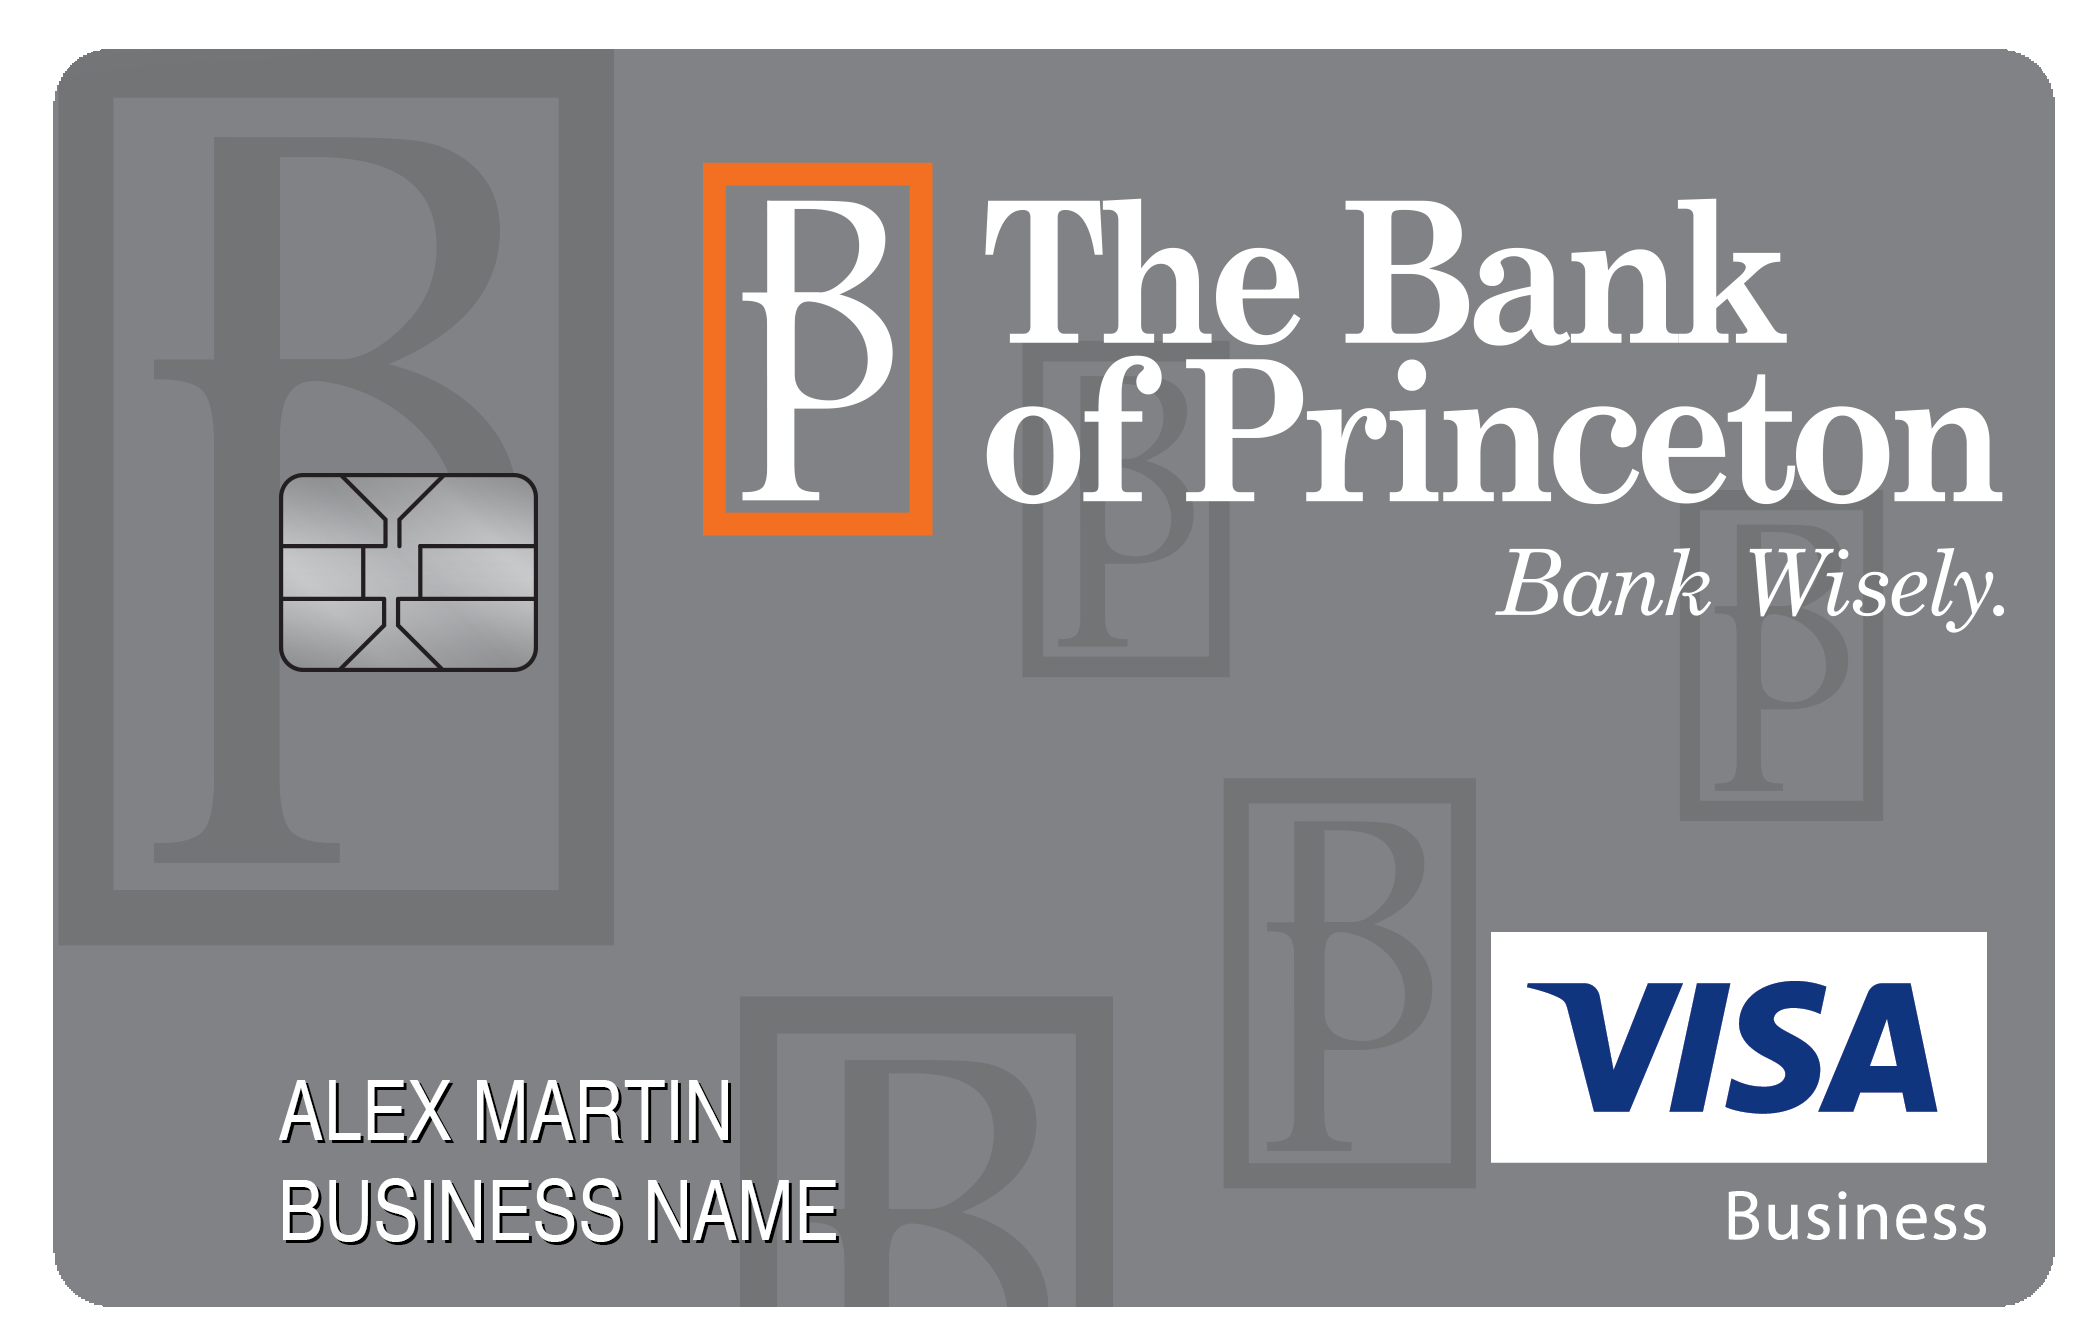 The Bank of Princeton Business Cash Preferred Card